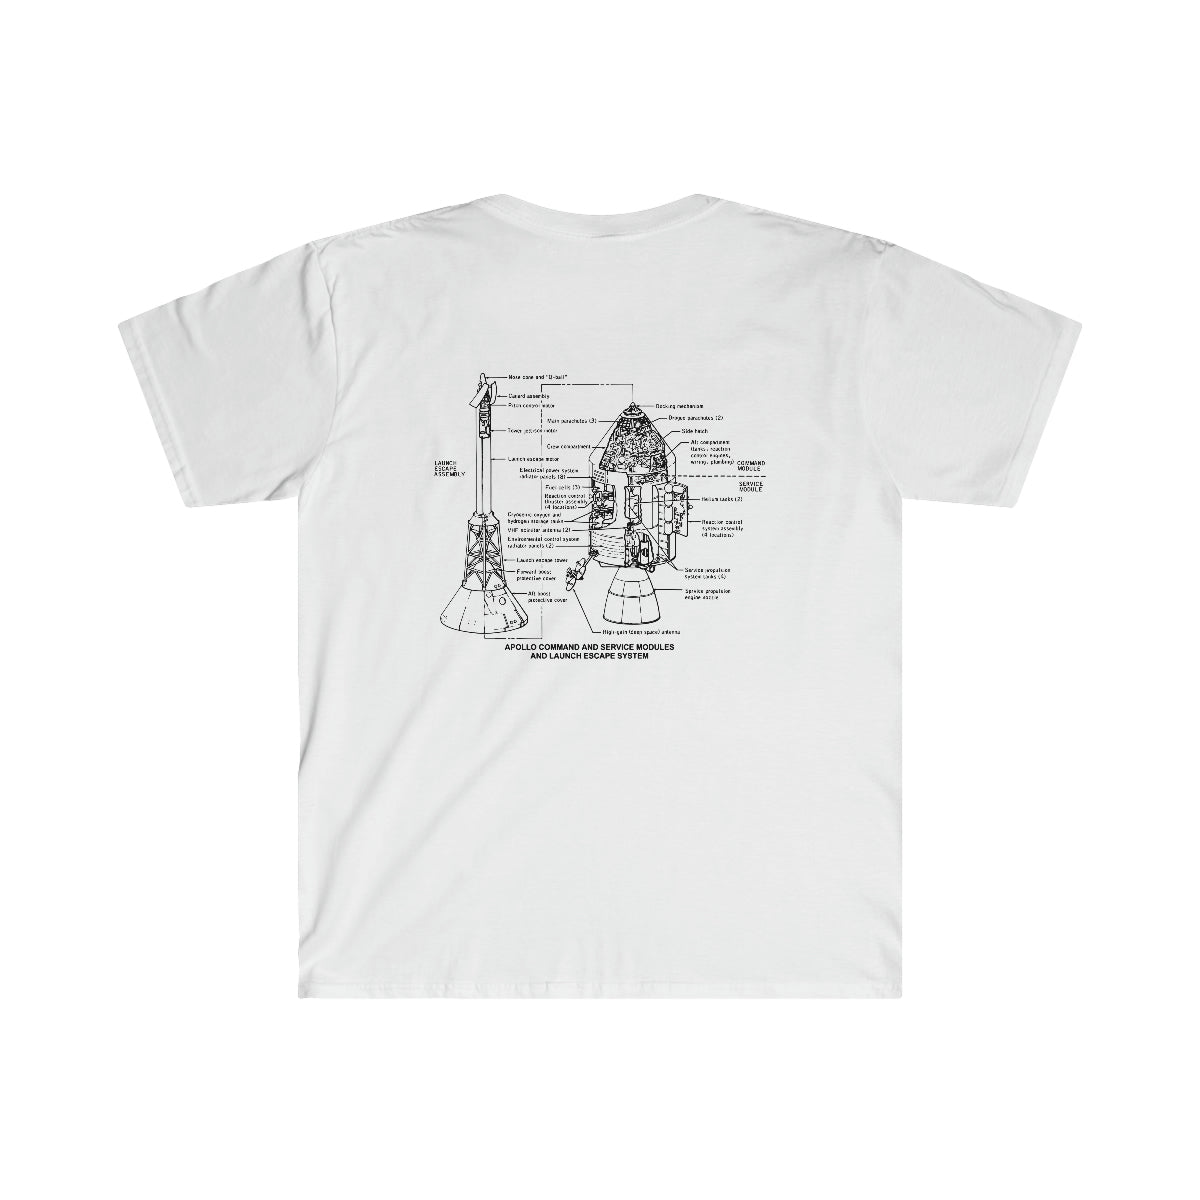 This historic Apollo Command & Service Module T-Shirt features a diagram of a spacecraft from the Apollo space program.